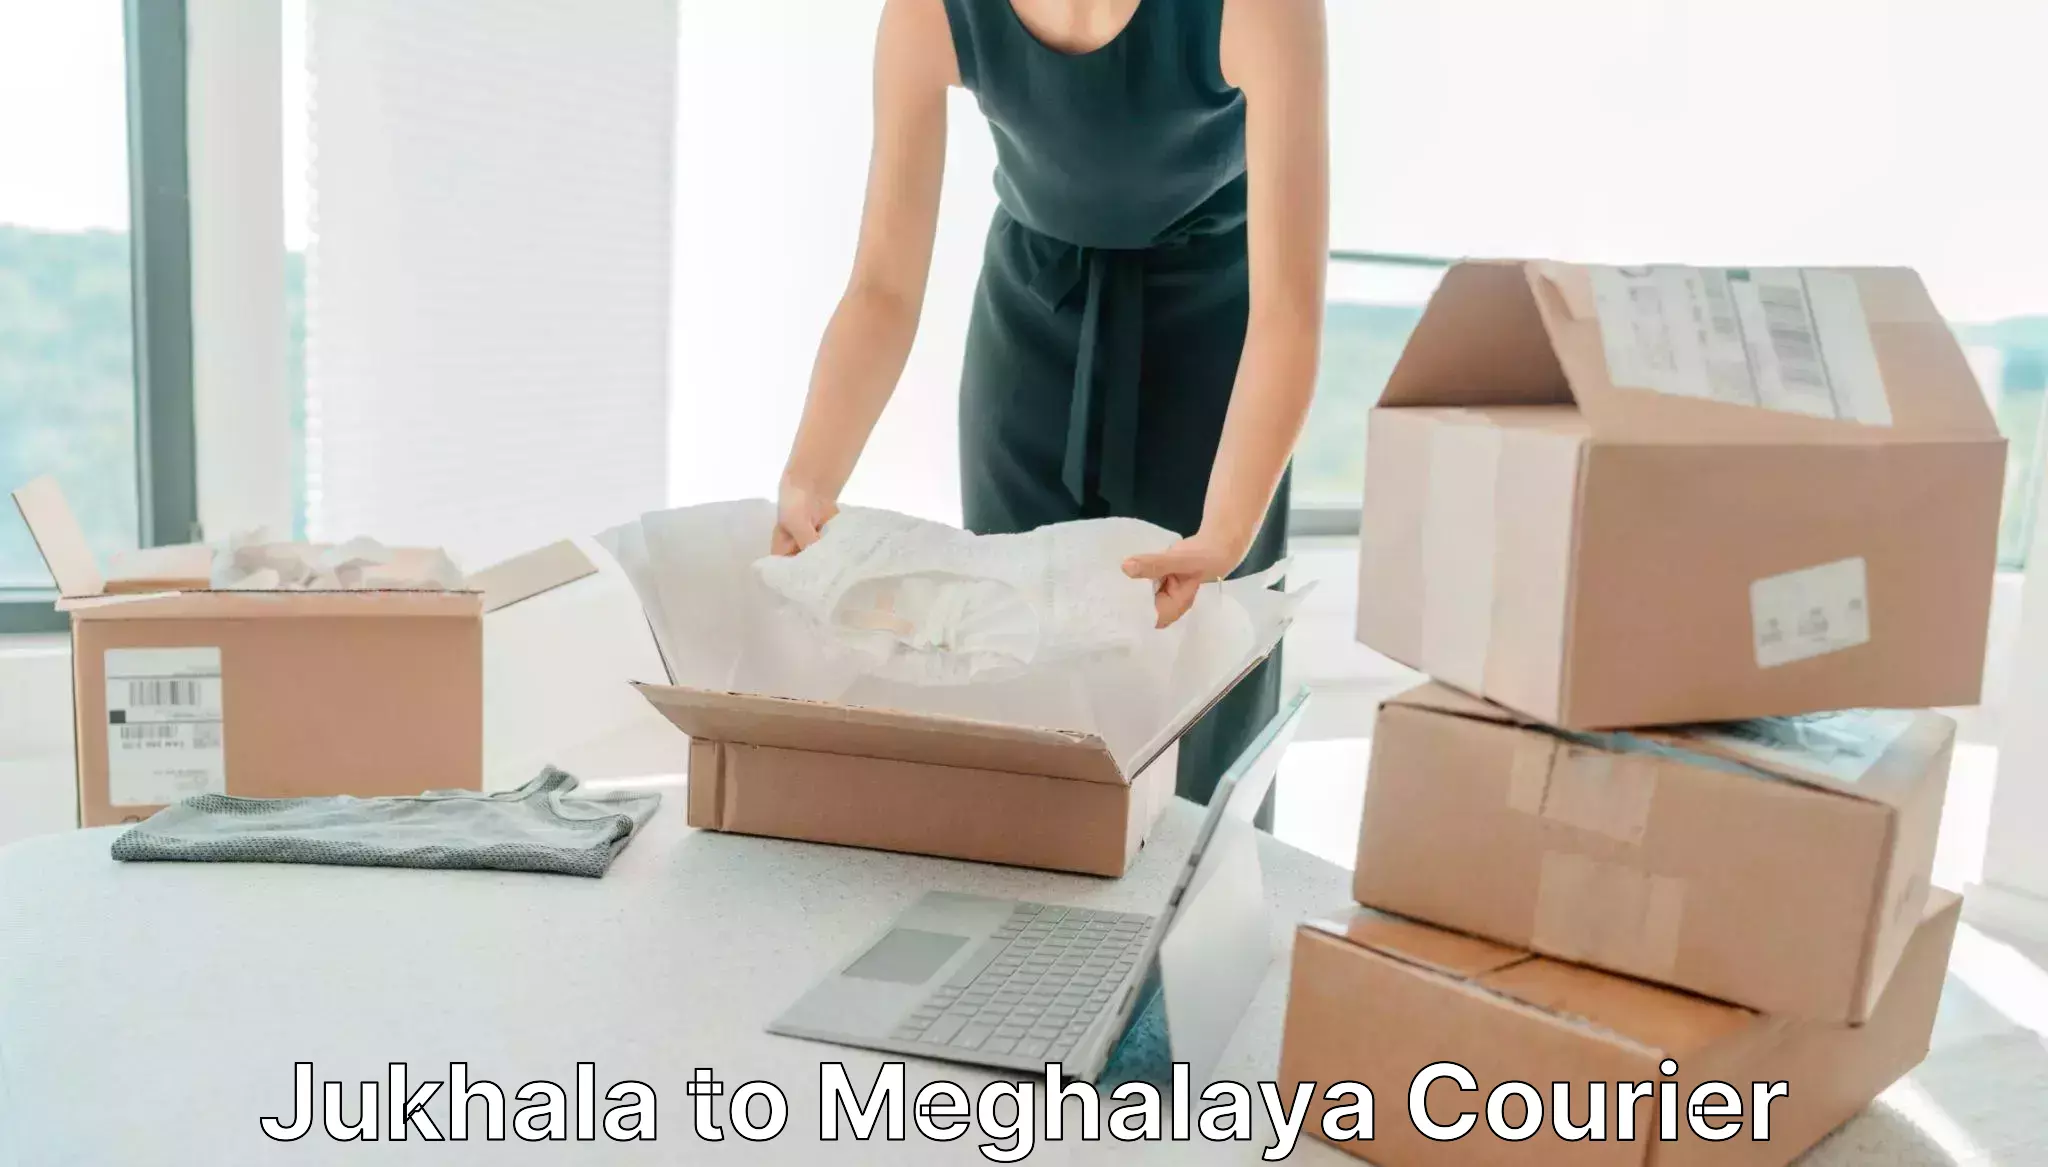 Multi-national courier services in Jukhala to Shillong